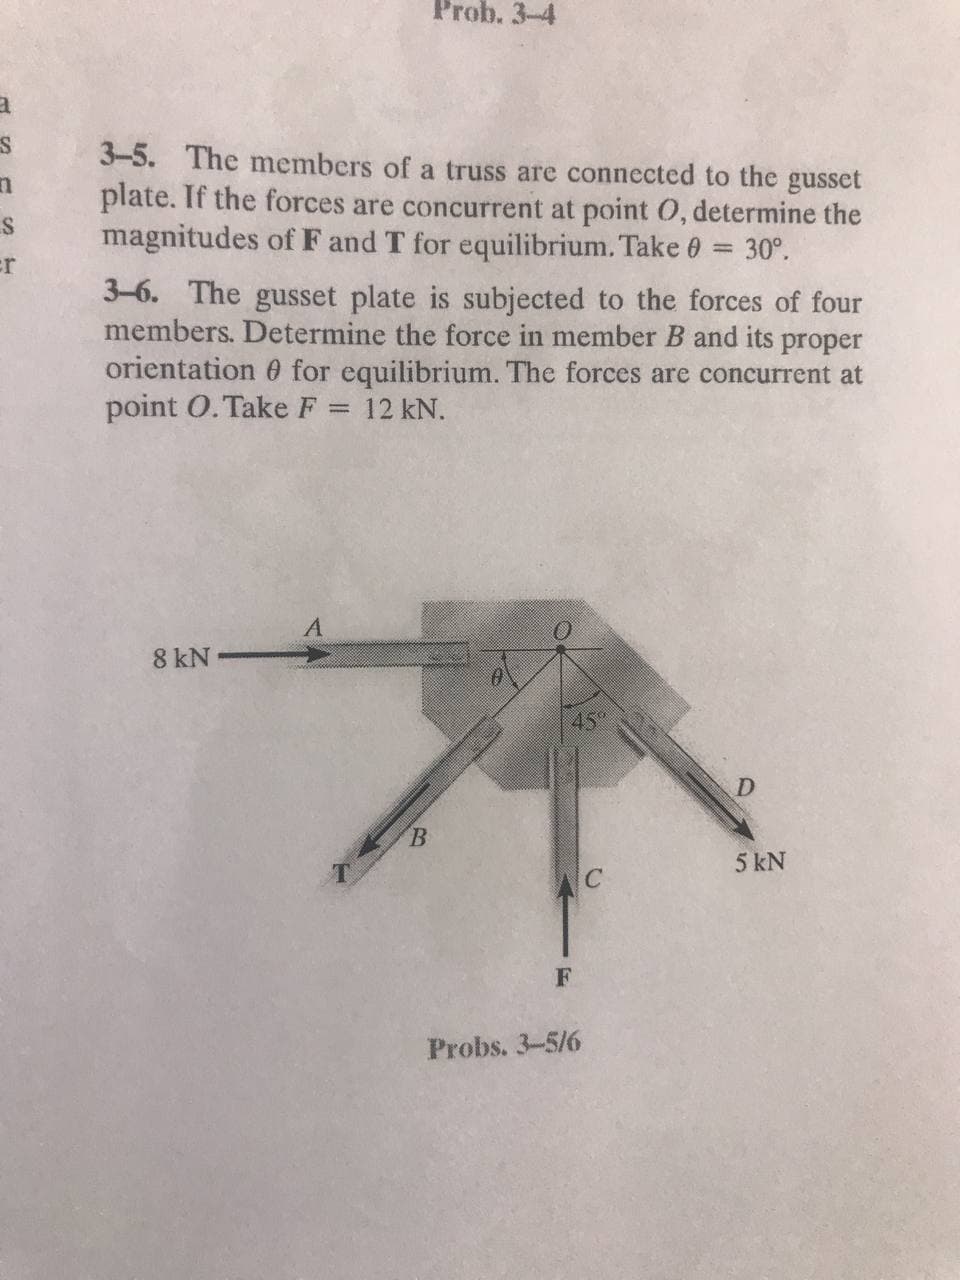 Prob. 3-4
3-5. The members of a truss are connected to the gusset
plate. If the forces are concurrent at point 0, determine the
magnitudes of F and T for equilibrium. Take 0 = 30°.
%3D
er
3-6. The gusset plate is subjected to the forces of four
members. Determine the force in member B and its proper
orientation 0 for equilibrium. The forces are concurrent at
point O. Take F = 12 kN.
A
8 kN•
45°
D.
B.
5 kN
AC
Probs. 3-5/6
